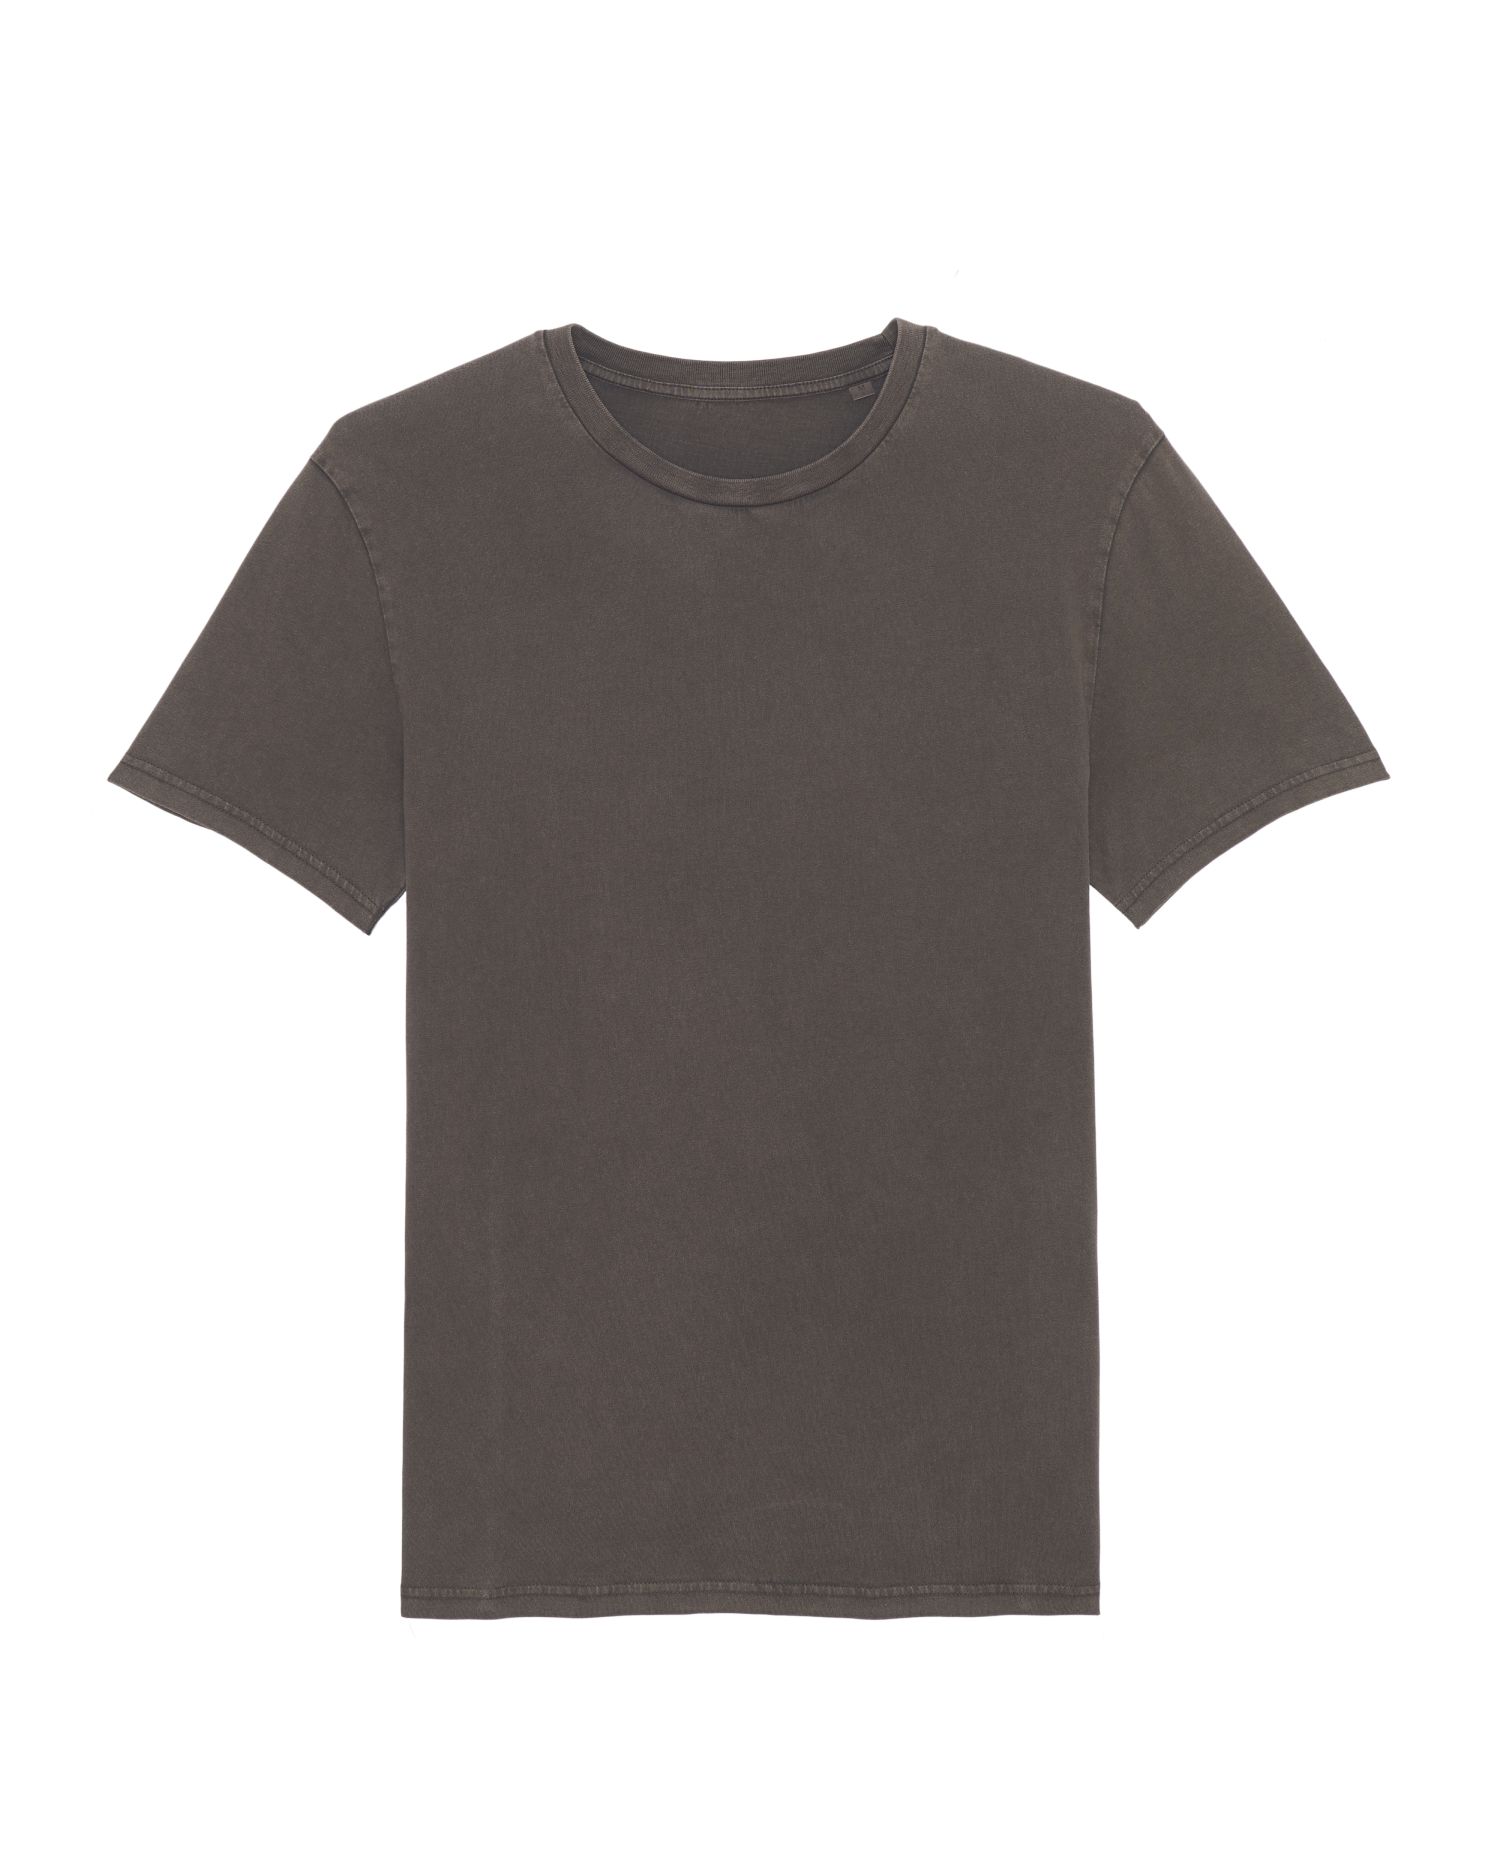 T-Shirt Creator Vintage in Farbe G. Dyed Aged Deep Chocolate